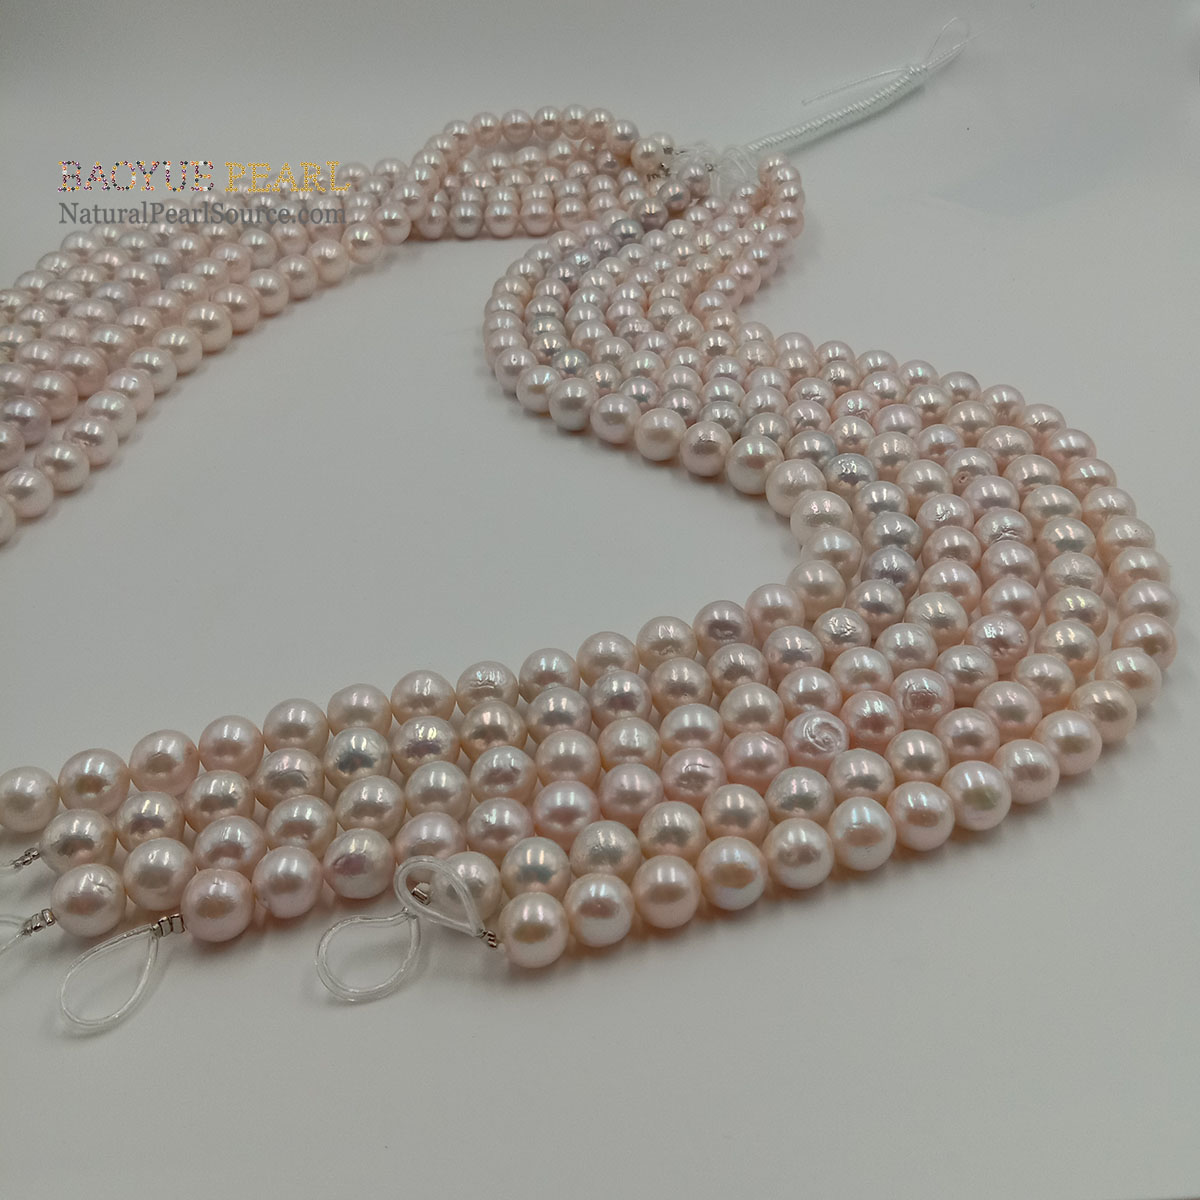 11-13 mm freshwater pearl wholesale 16 inch white round loose freshwater pearls in strand